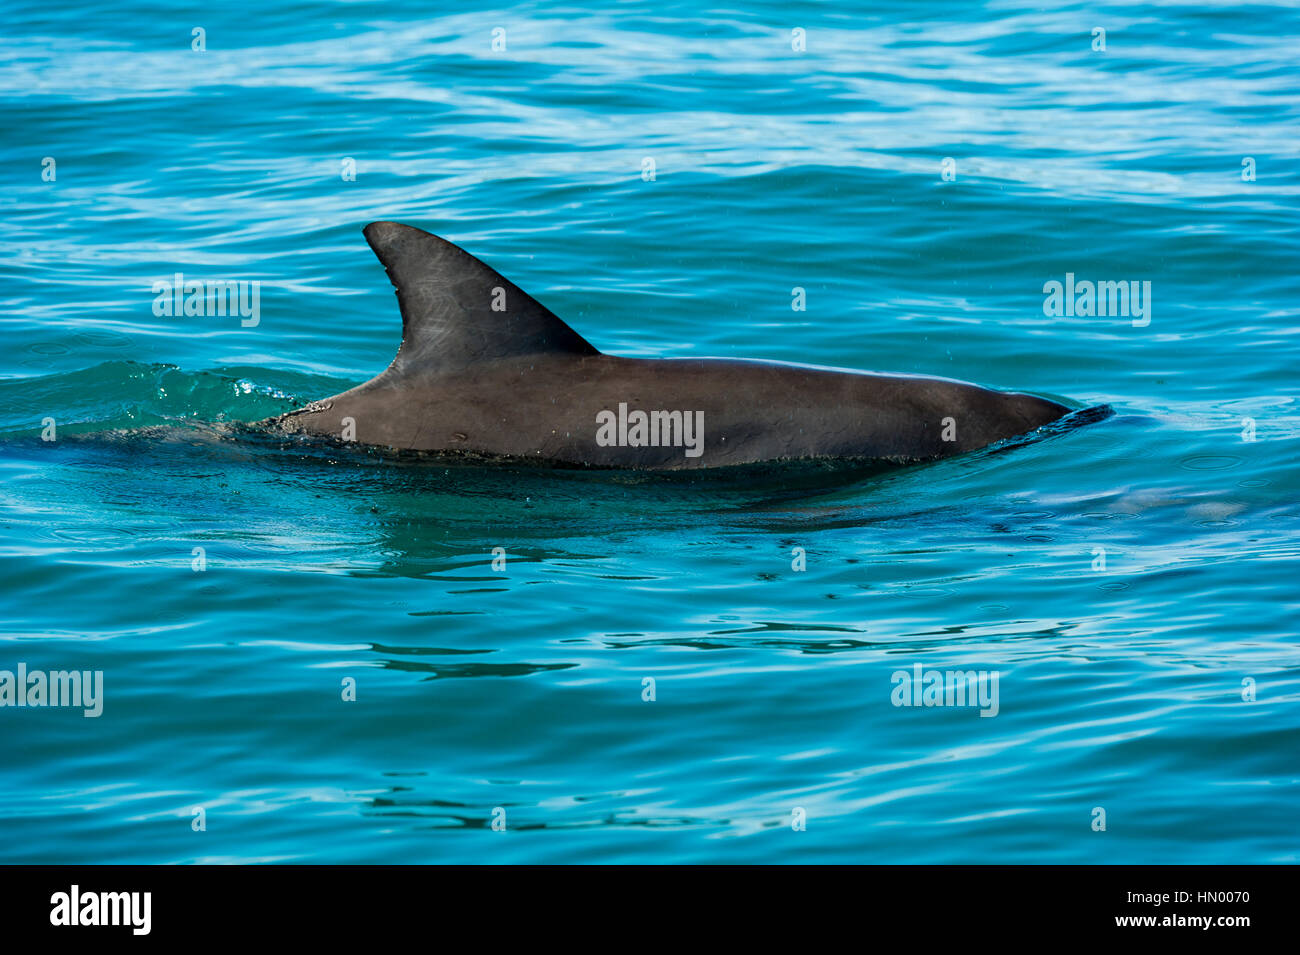 The dorsal fin of an Indo-Pacific Bottlenose Dolphin surfacing on the ocean. Stock Photo